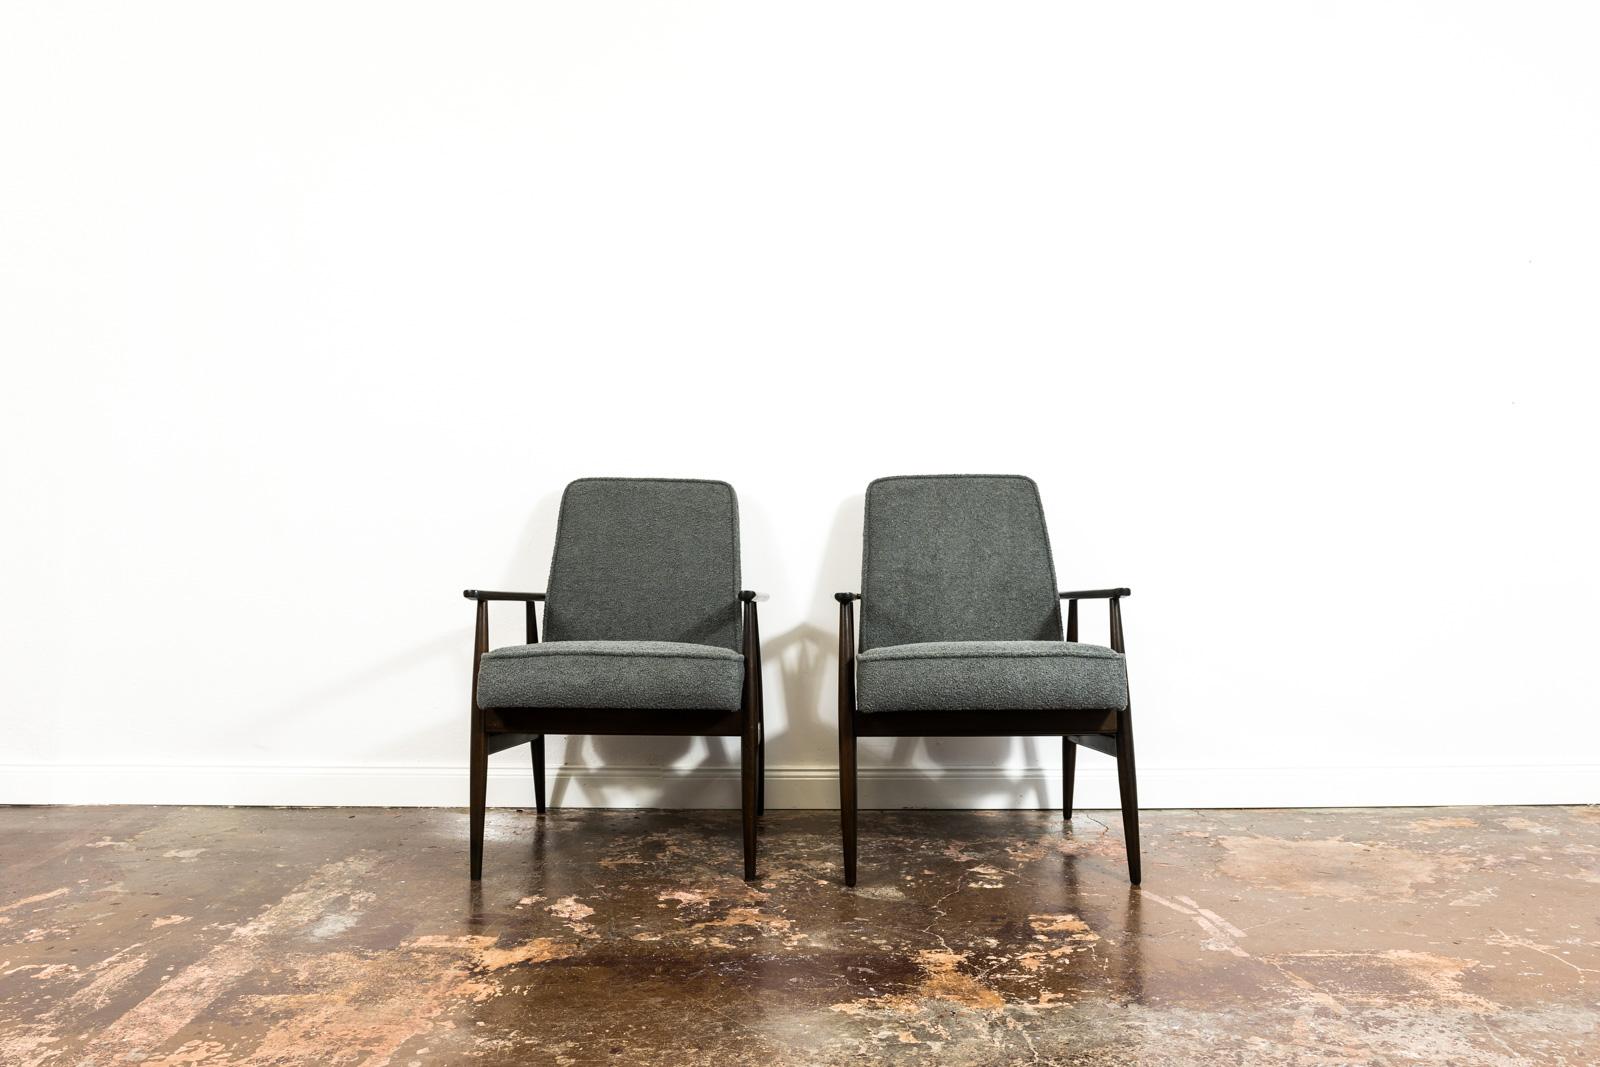 Pair of mid-century armchairs, type 300-190 designed by H. Lis, manufactured in Poland, 1960's.
Reupholstered armchairs in grey soft fabric, wood frames have been restored and refinished.
We offer fabric customization upon request.